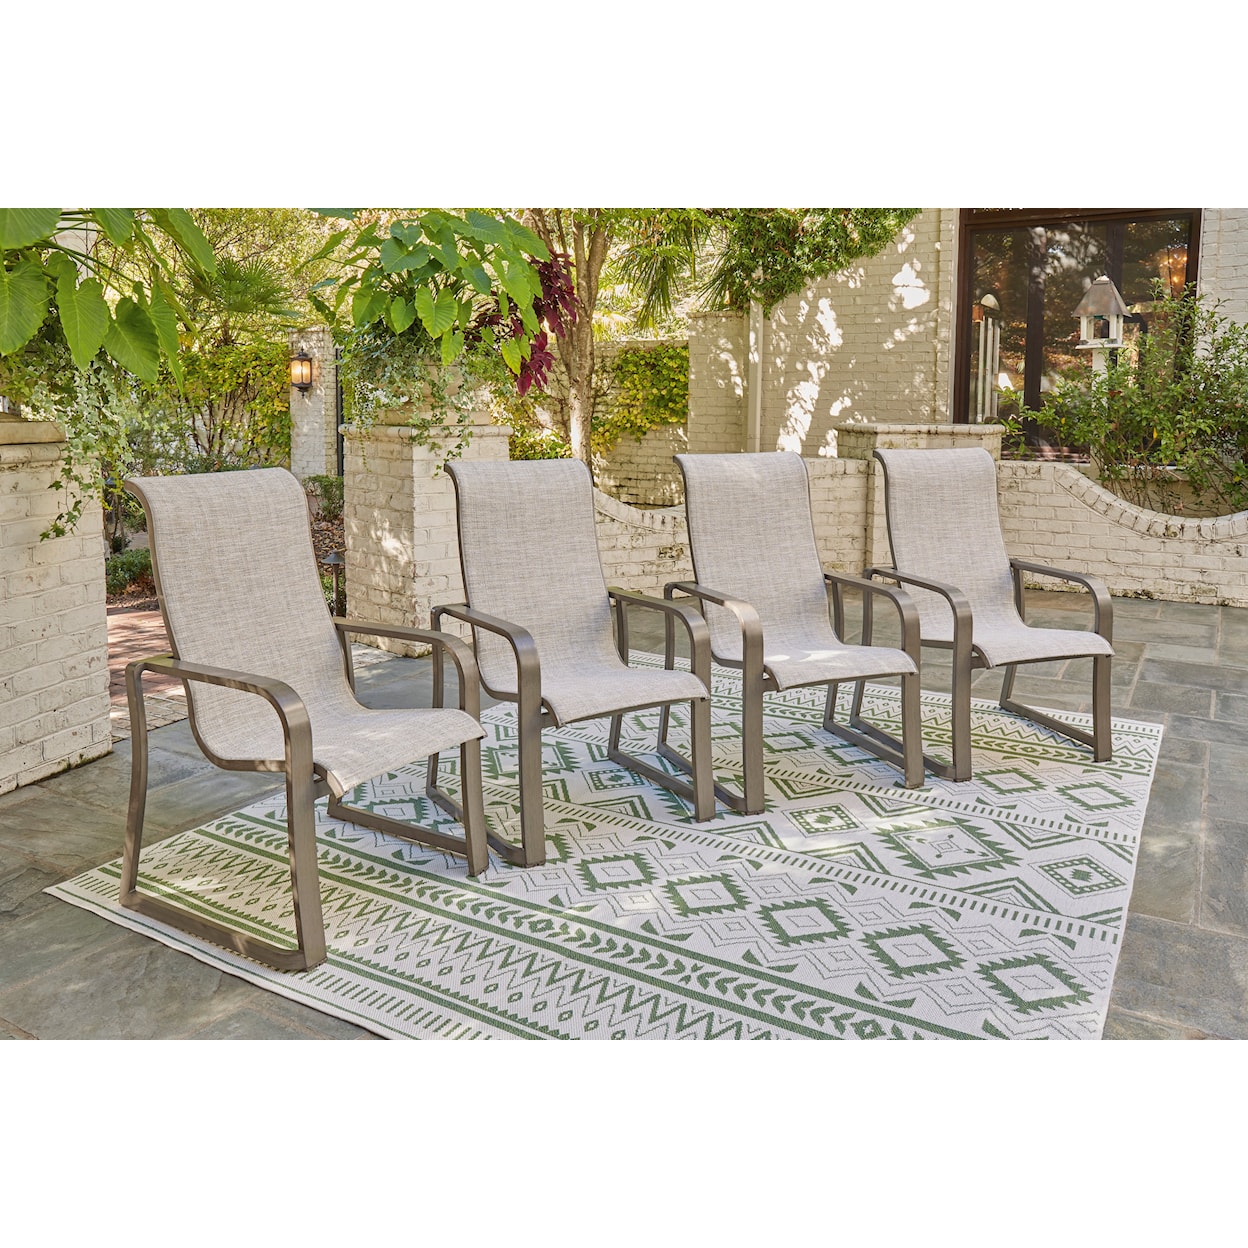 Signature Design by Ashley Beach Front Stackable Sling Arm Chair